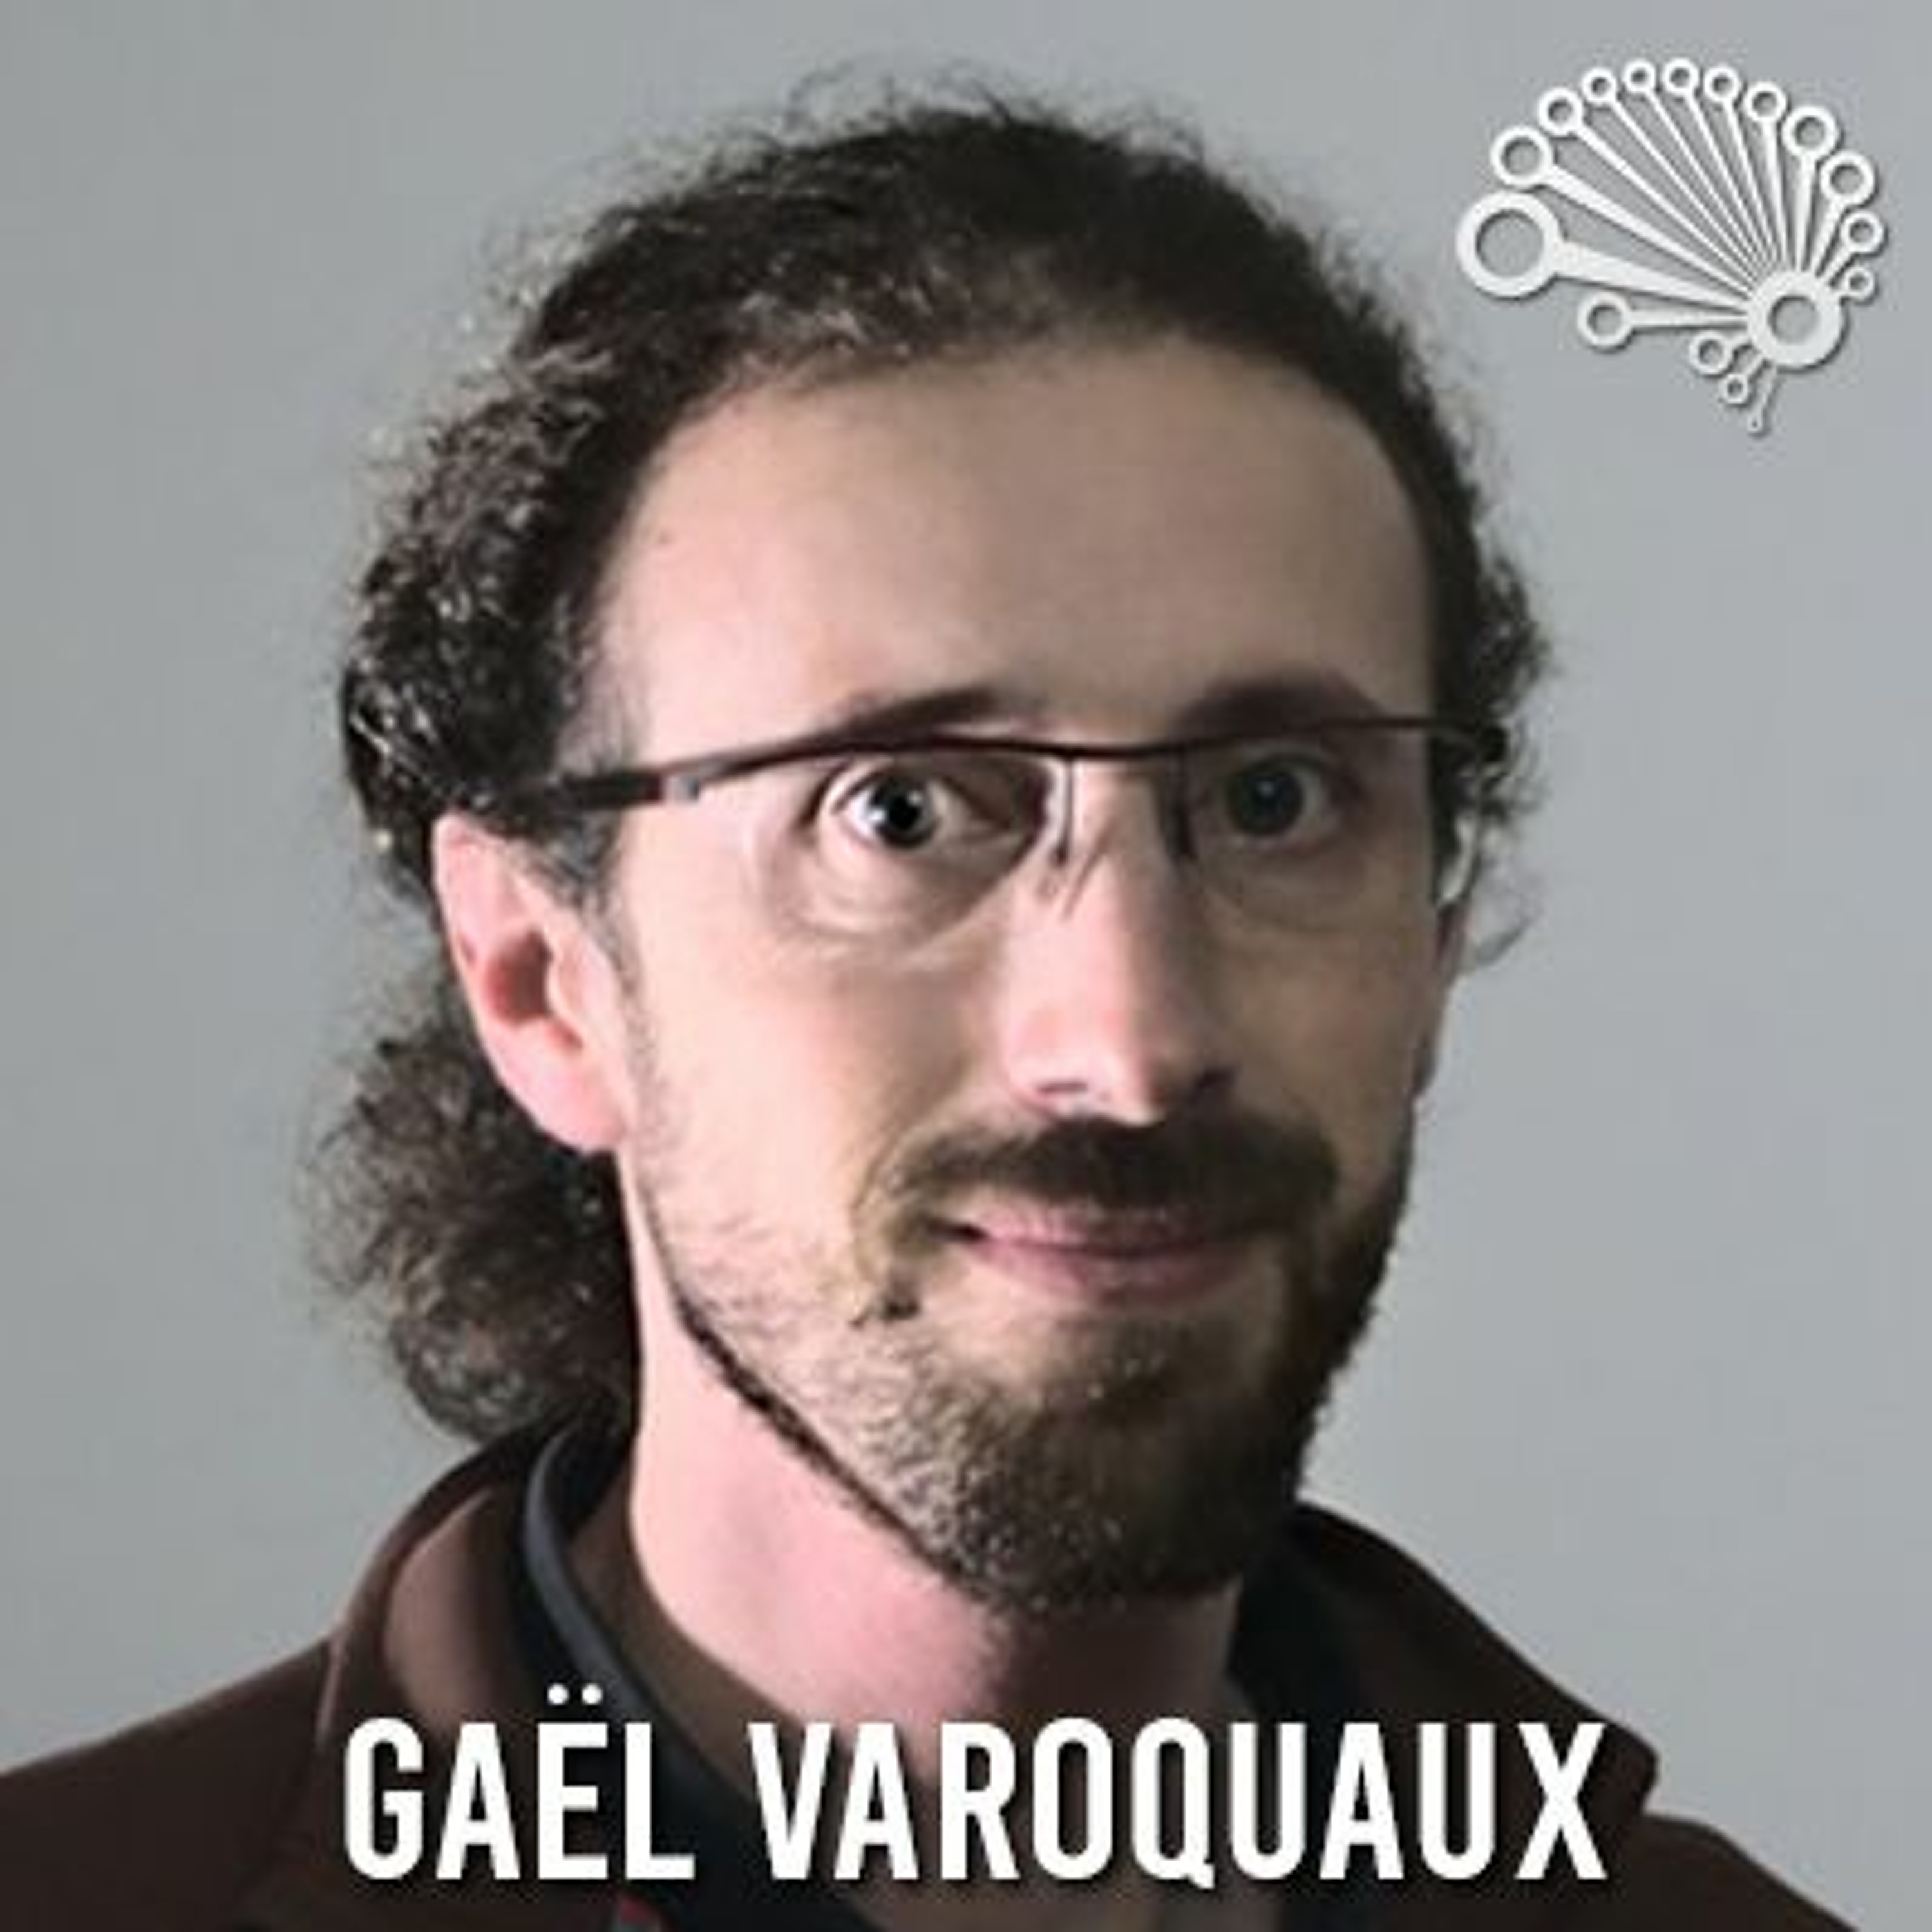 737: scikit-learn's Past, Present and Future, with scikit-learn co-founder Dr. Gaël Varoquaux